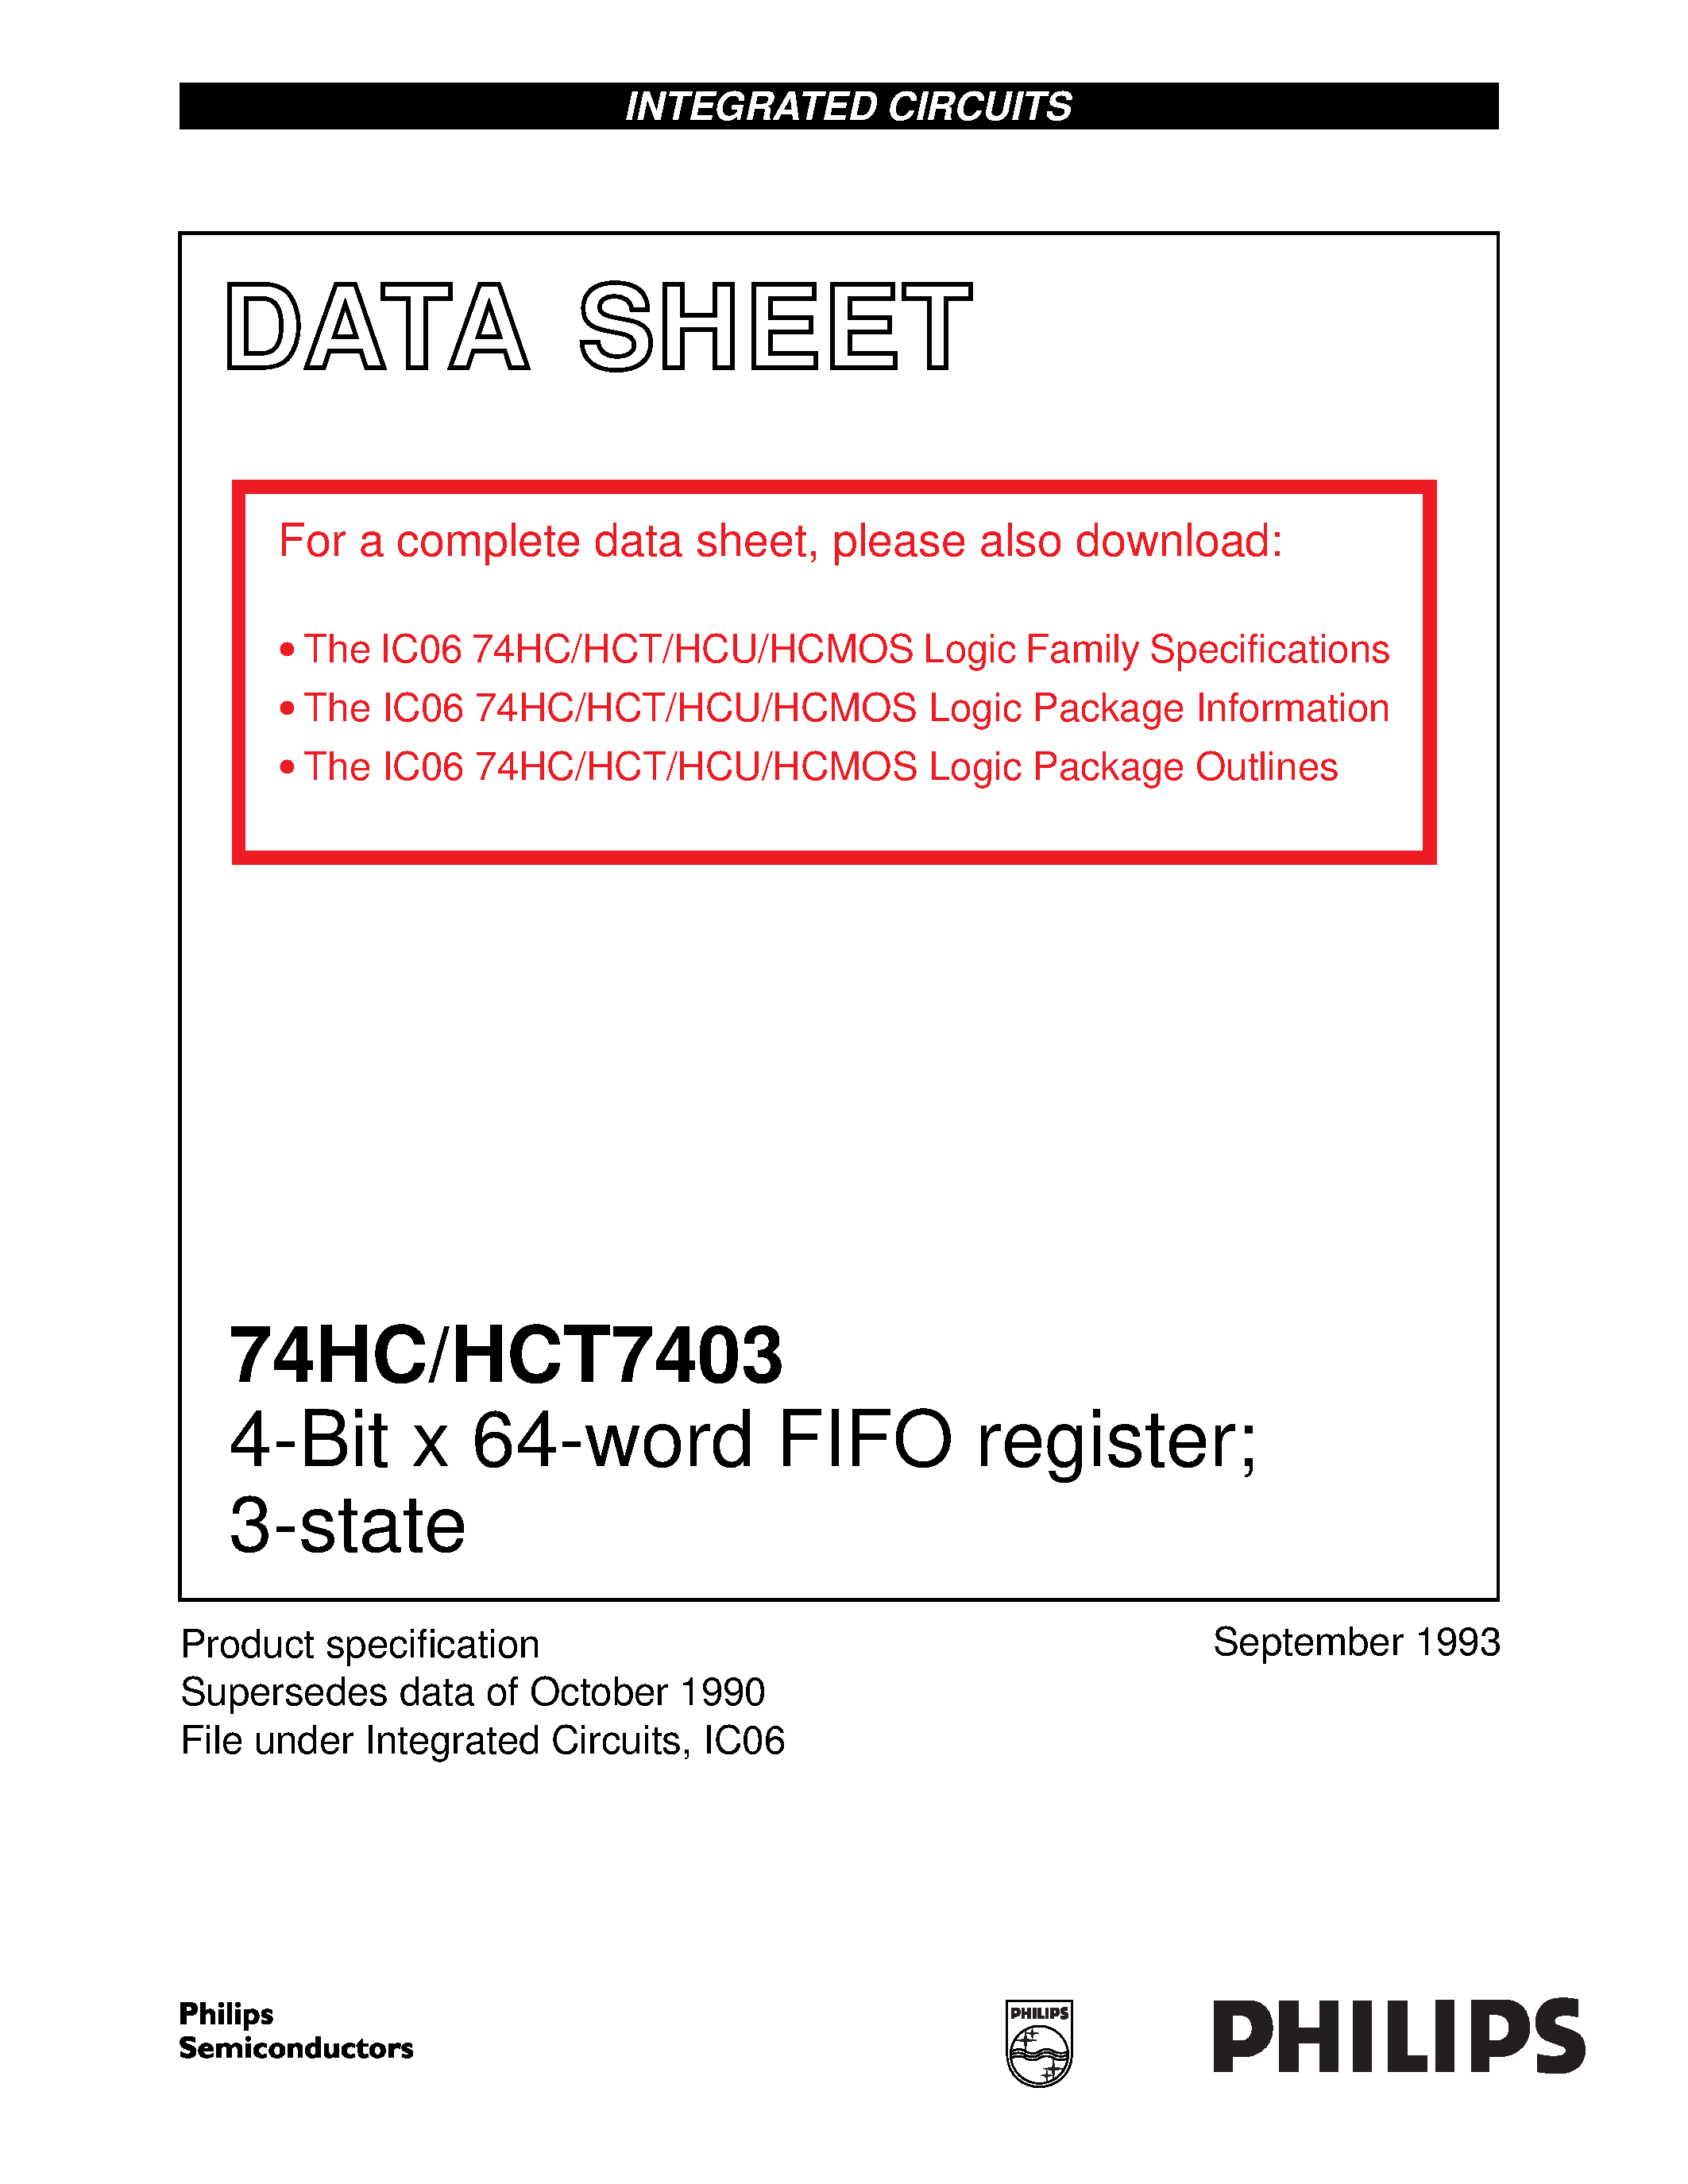 Datasheet 74HCT7403D - 4-Bit x 64-word FIFO register; 3-state page 1